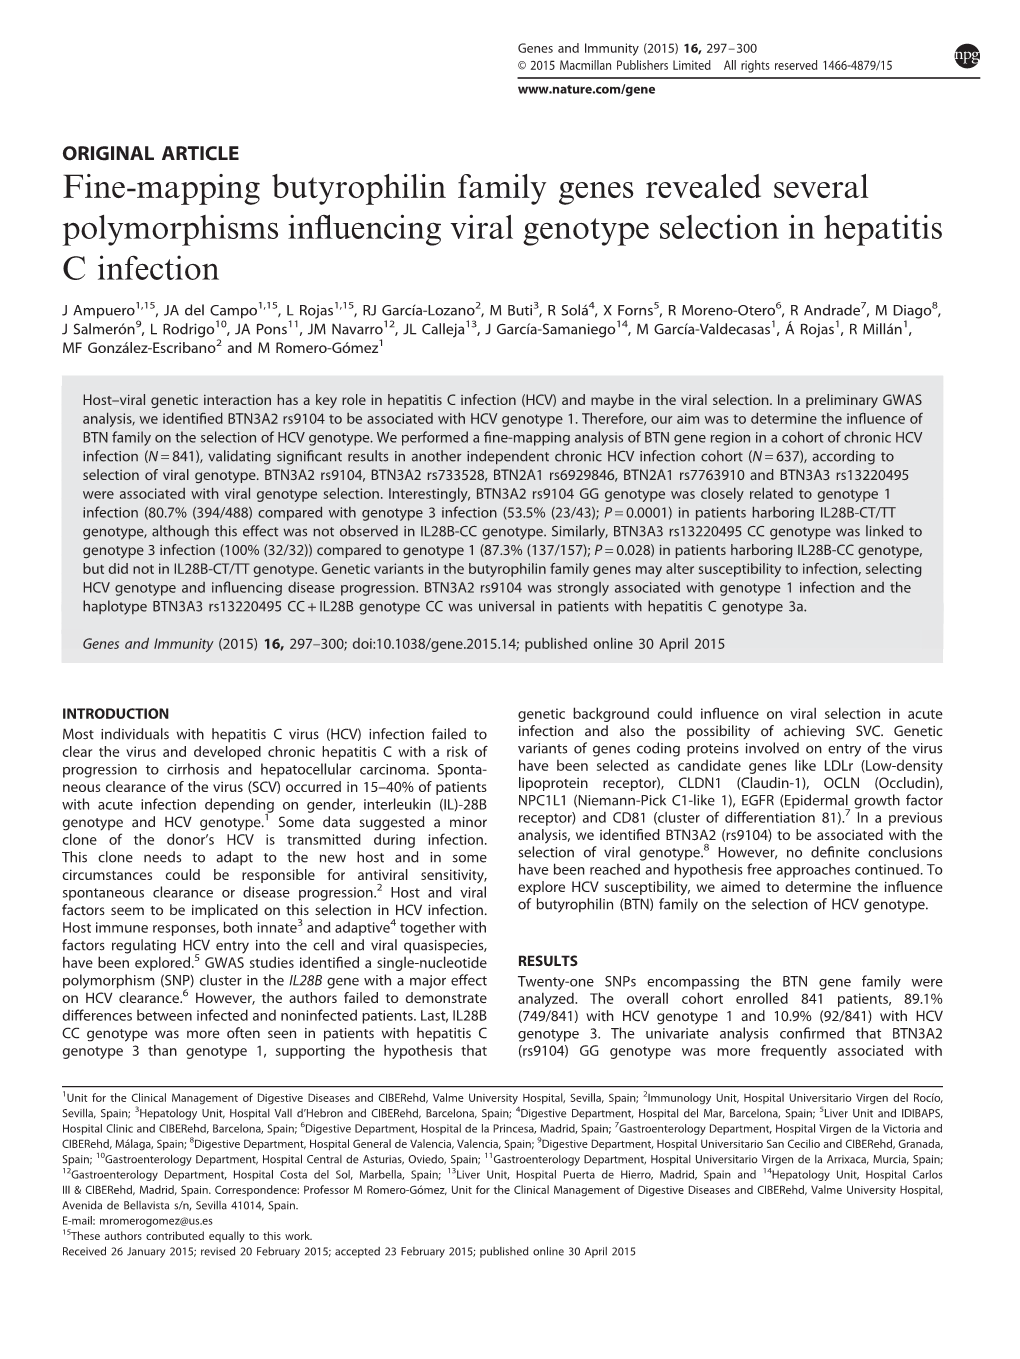 Fine-Mapping Butyrophilin Family Genes Revealed Several Polymorphisms Inﬂuencing Viral Genotype Selection in Hepatitis C Infection